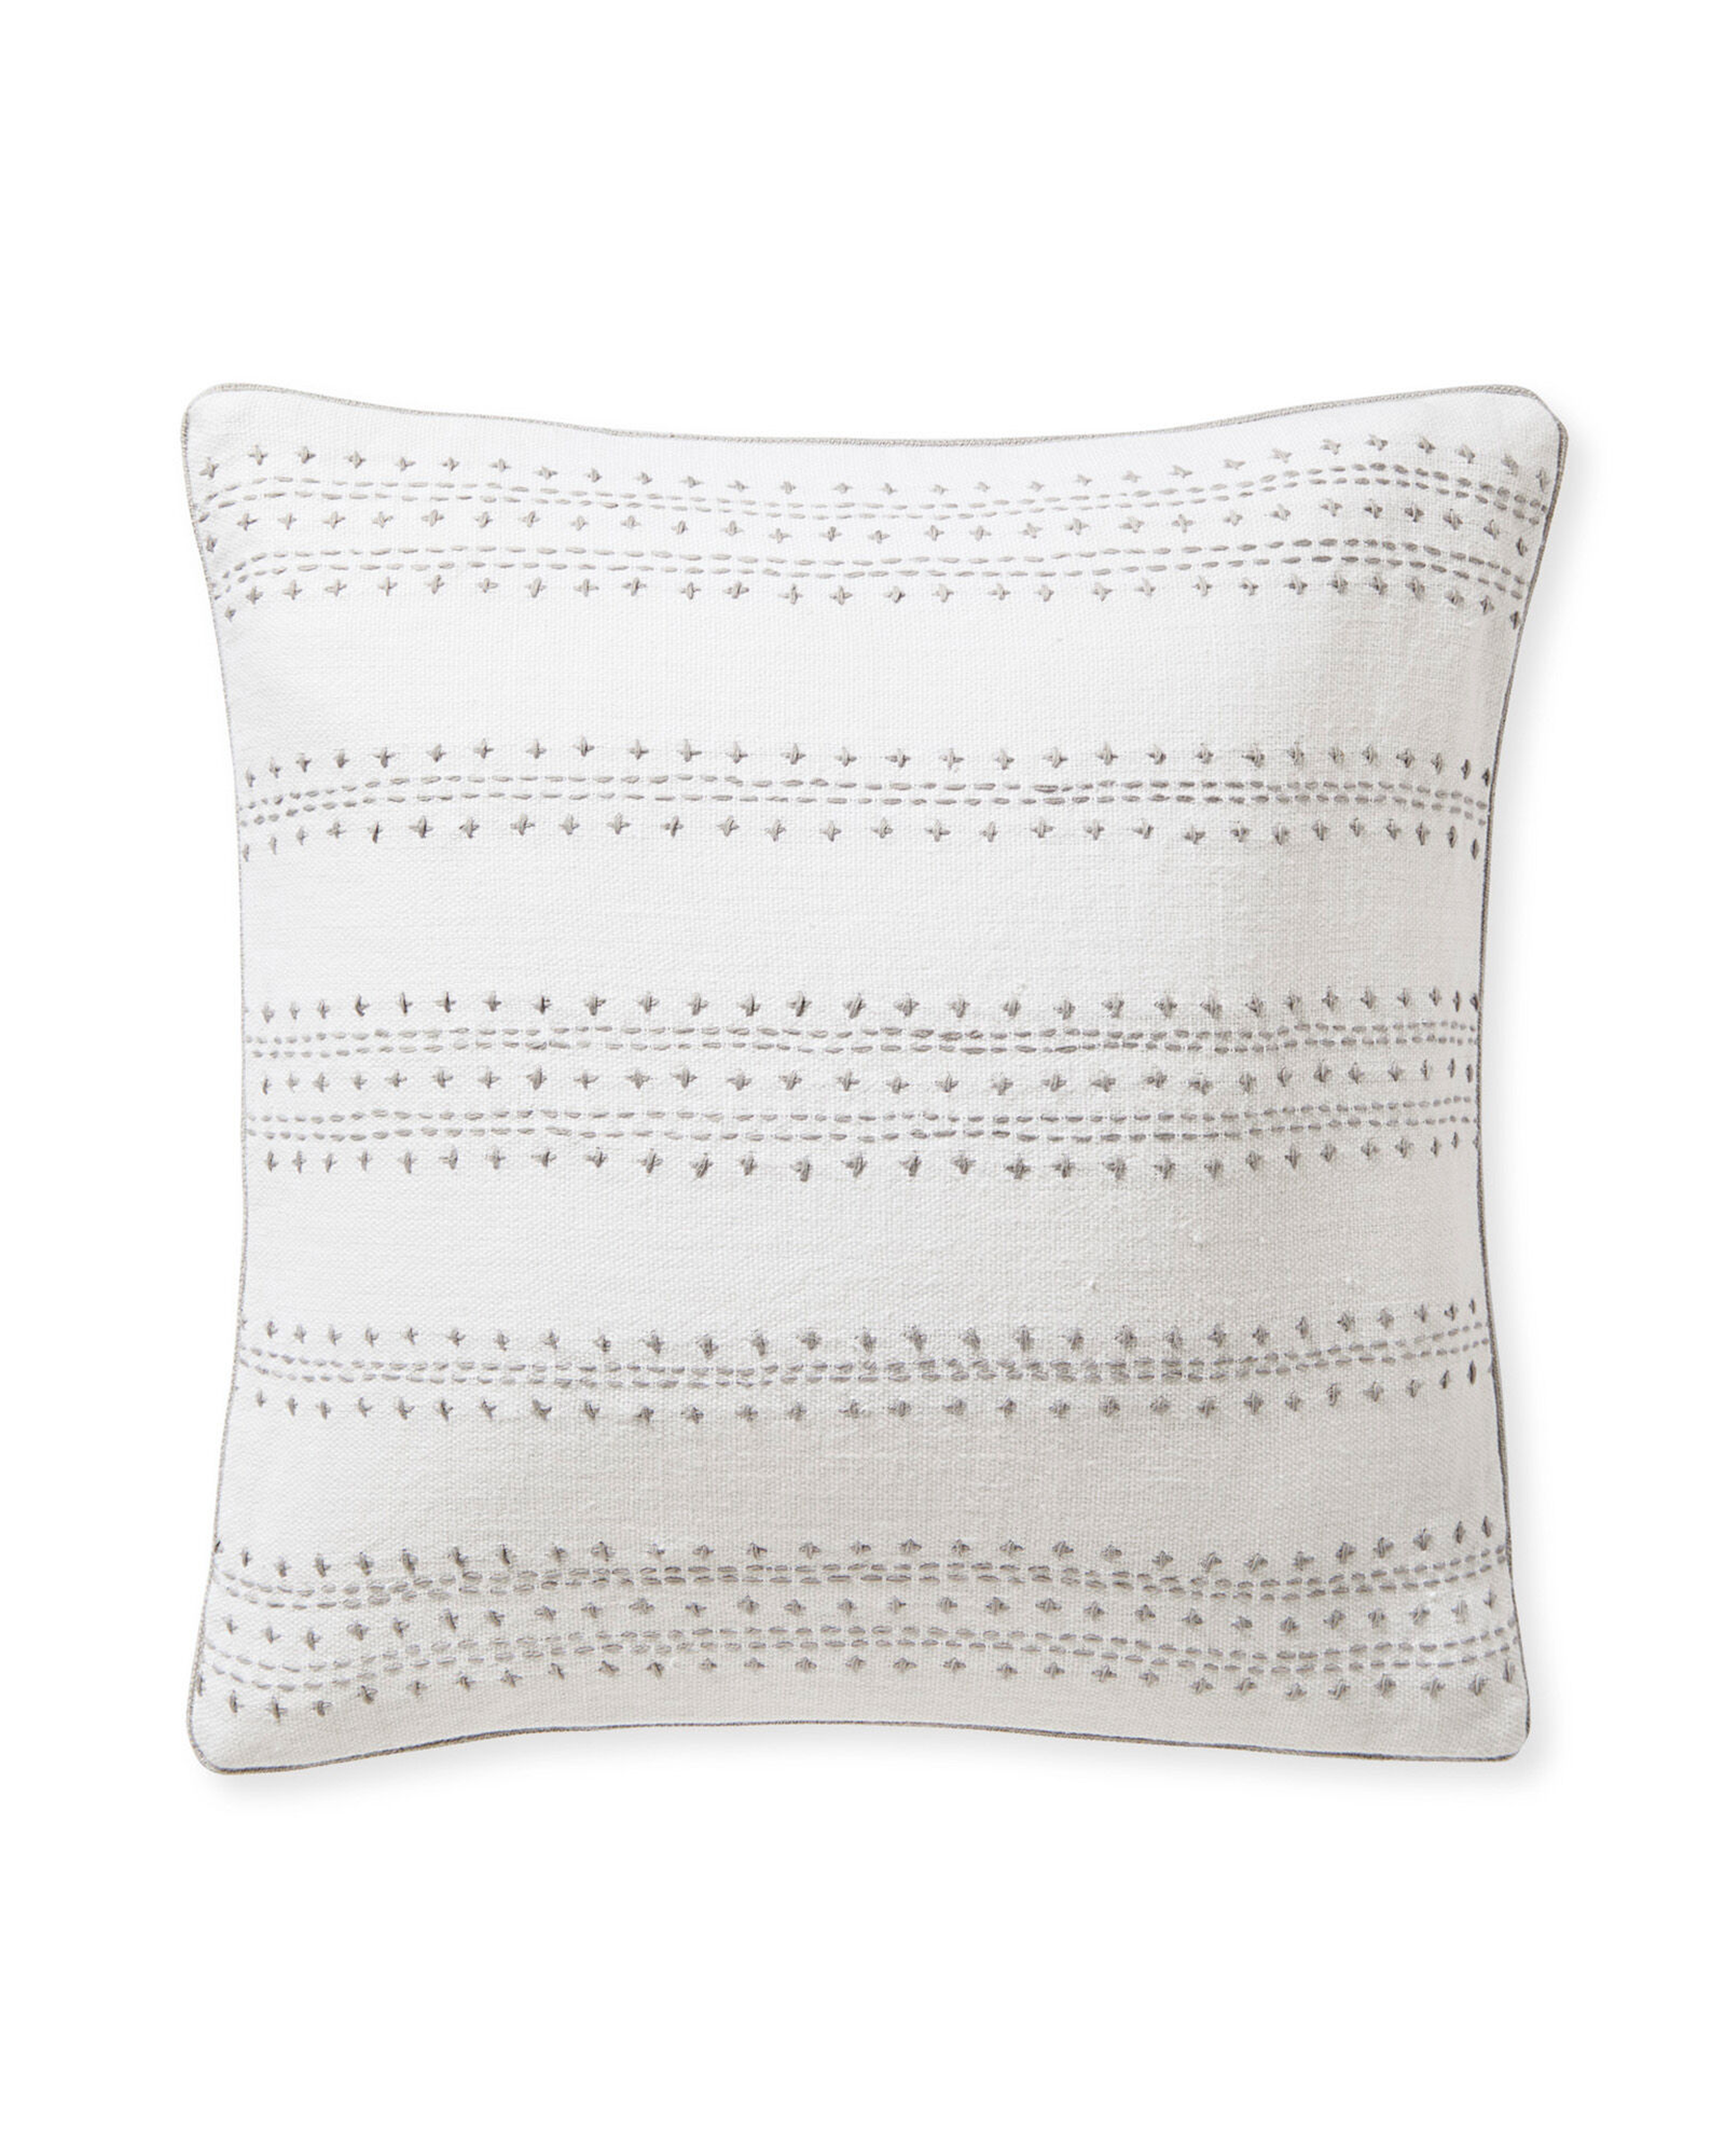 Catania Pillow Cover - Serena and Lily